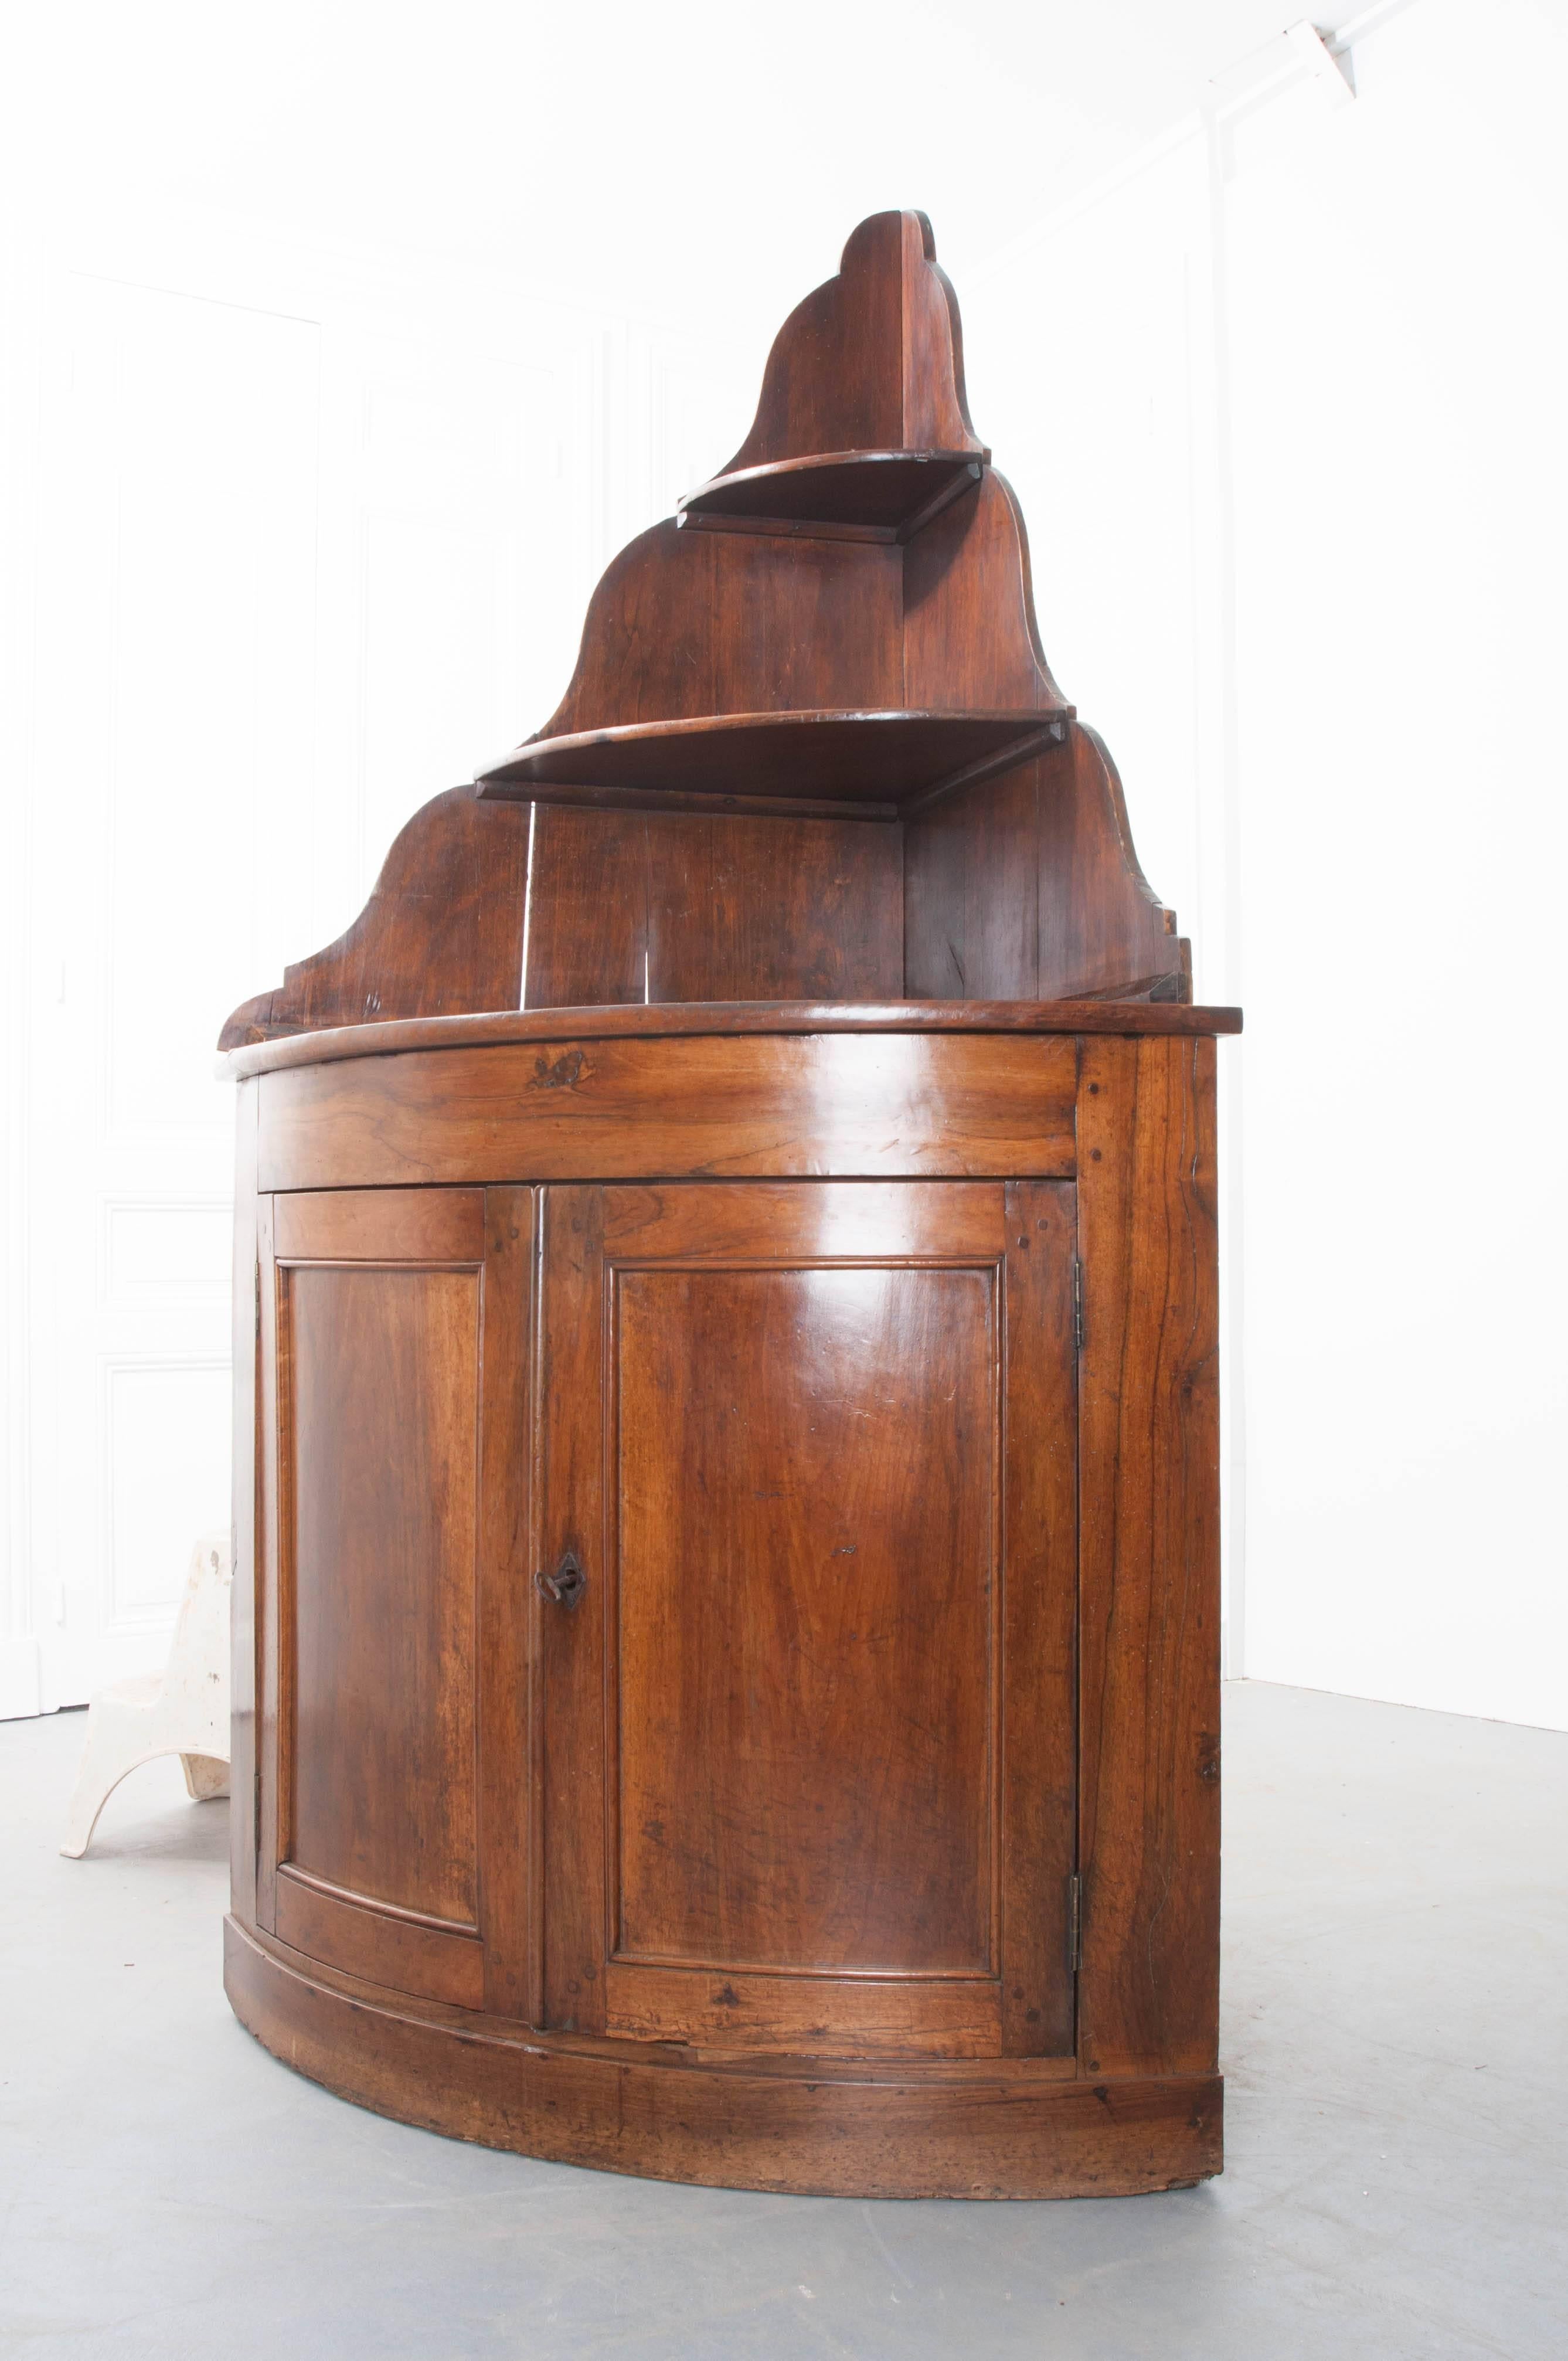 A marvelous solid walnut corner cabinet from 19th century, France. Often used as liqueur cabinets, these wonderful pieces are a great utilization of space. Today, it would make a wonderful bar or server in a dining area. The shaped back supports two